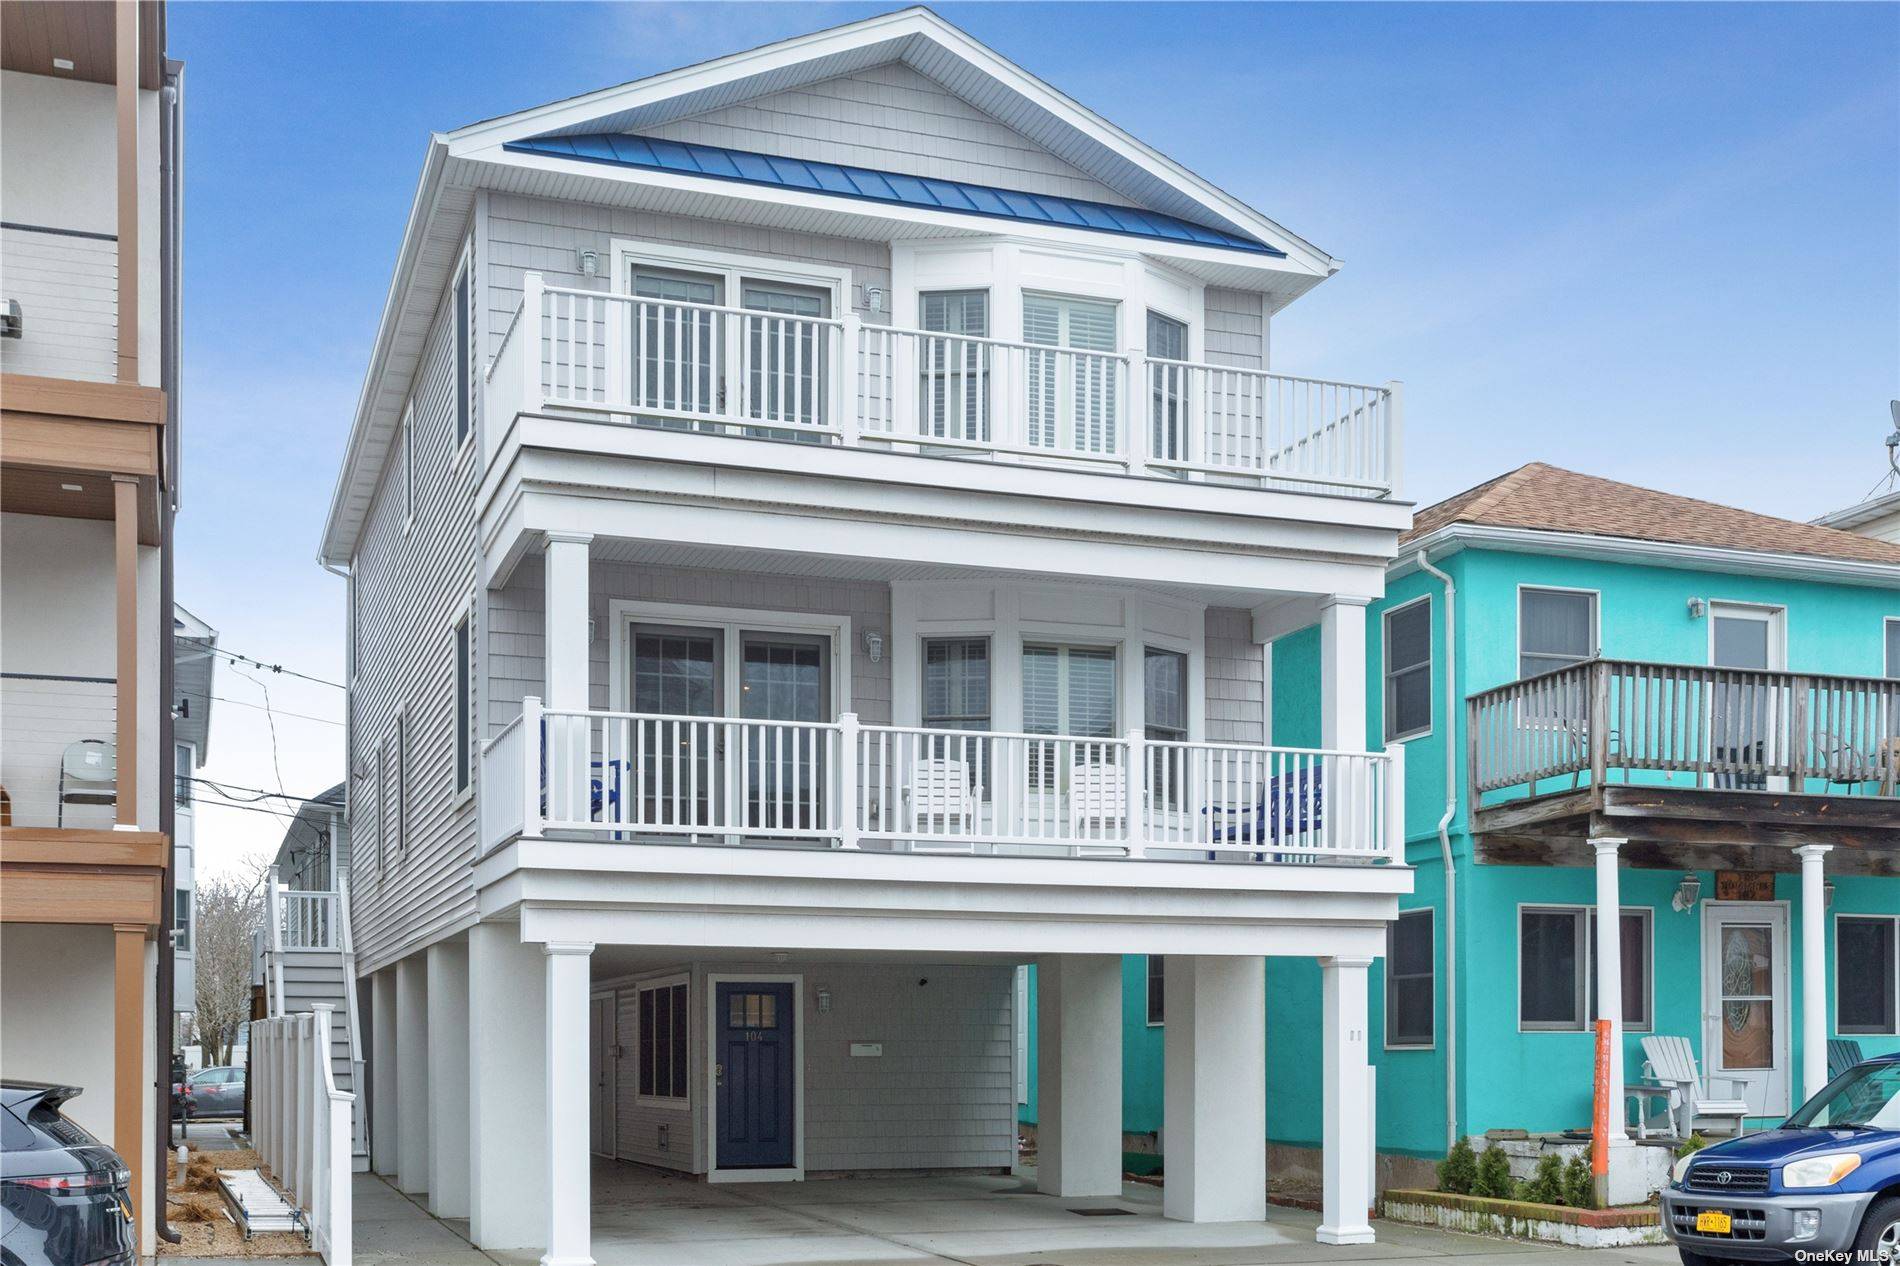 Mint Condition Beachside home with views of the bay and the ocean !